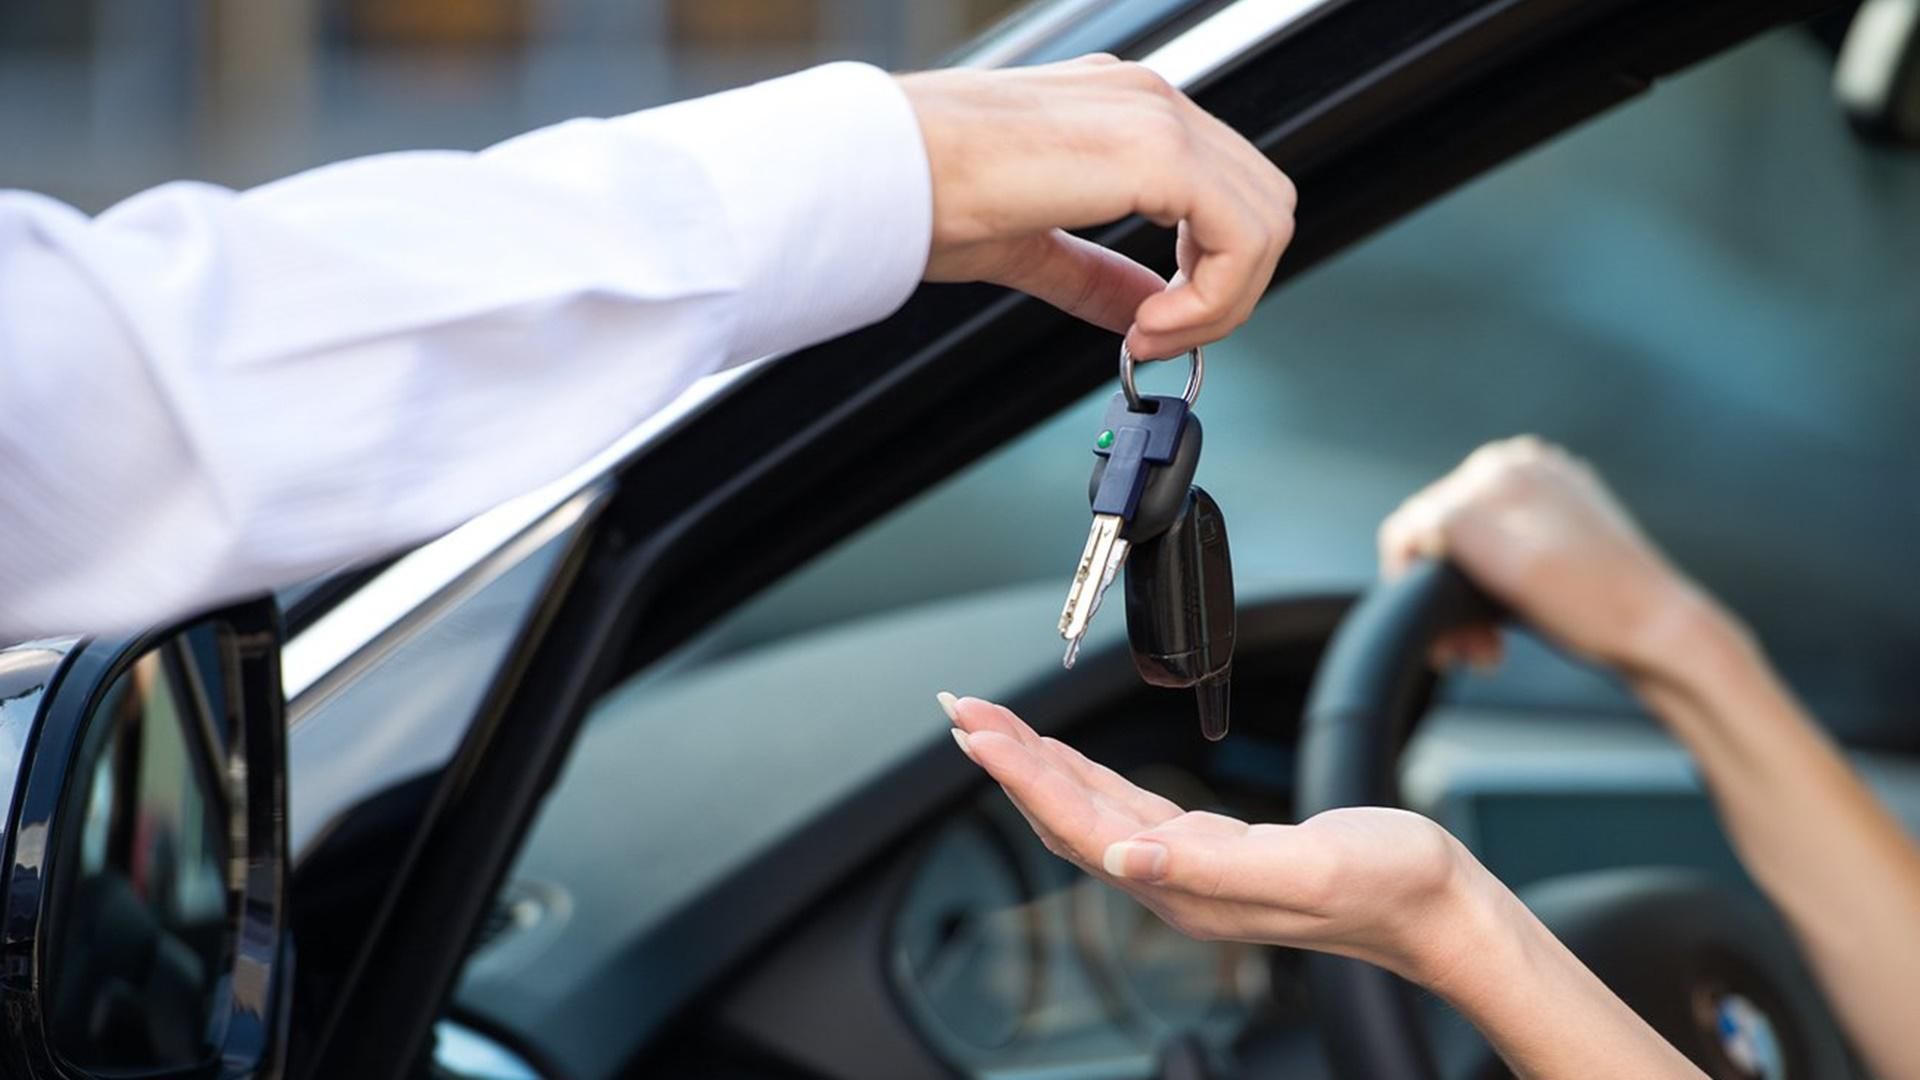 How to Make the Most of Valet Parking